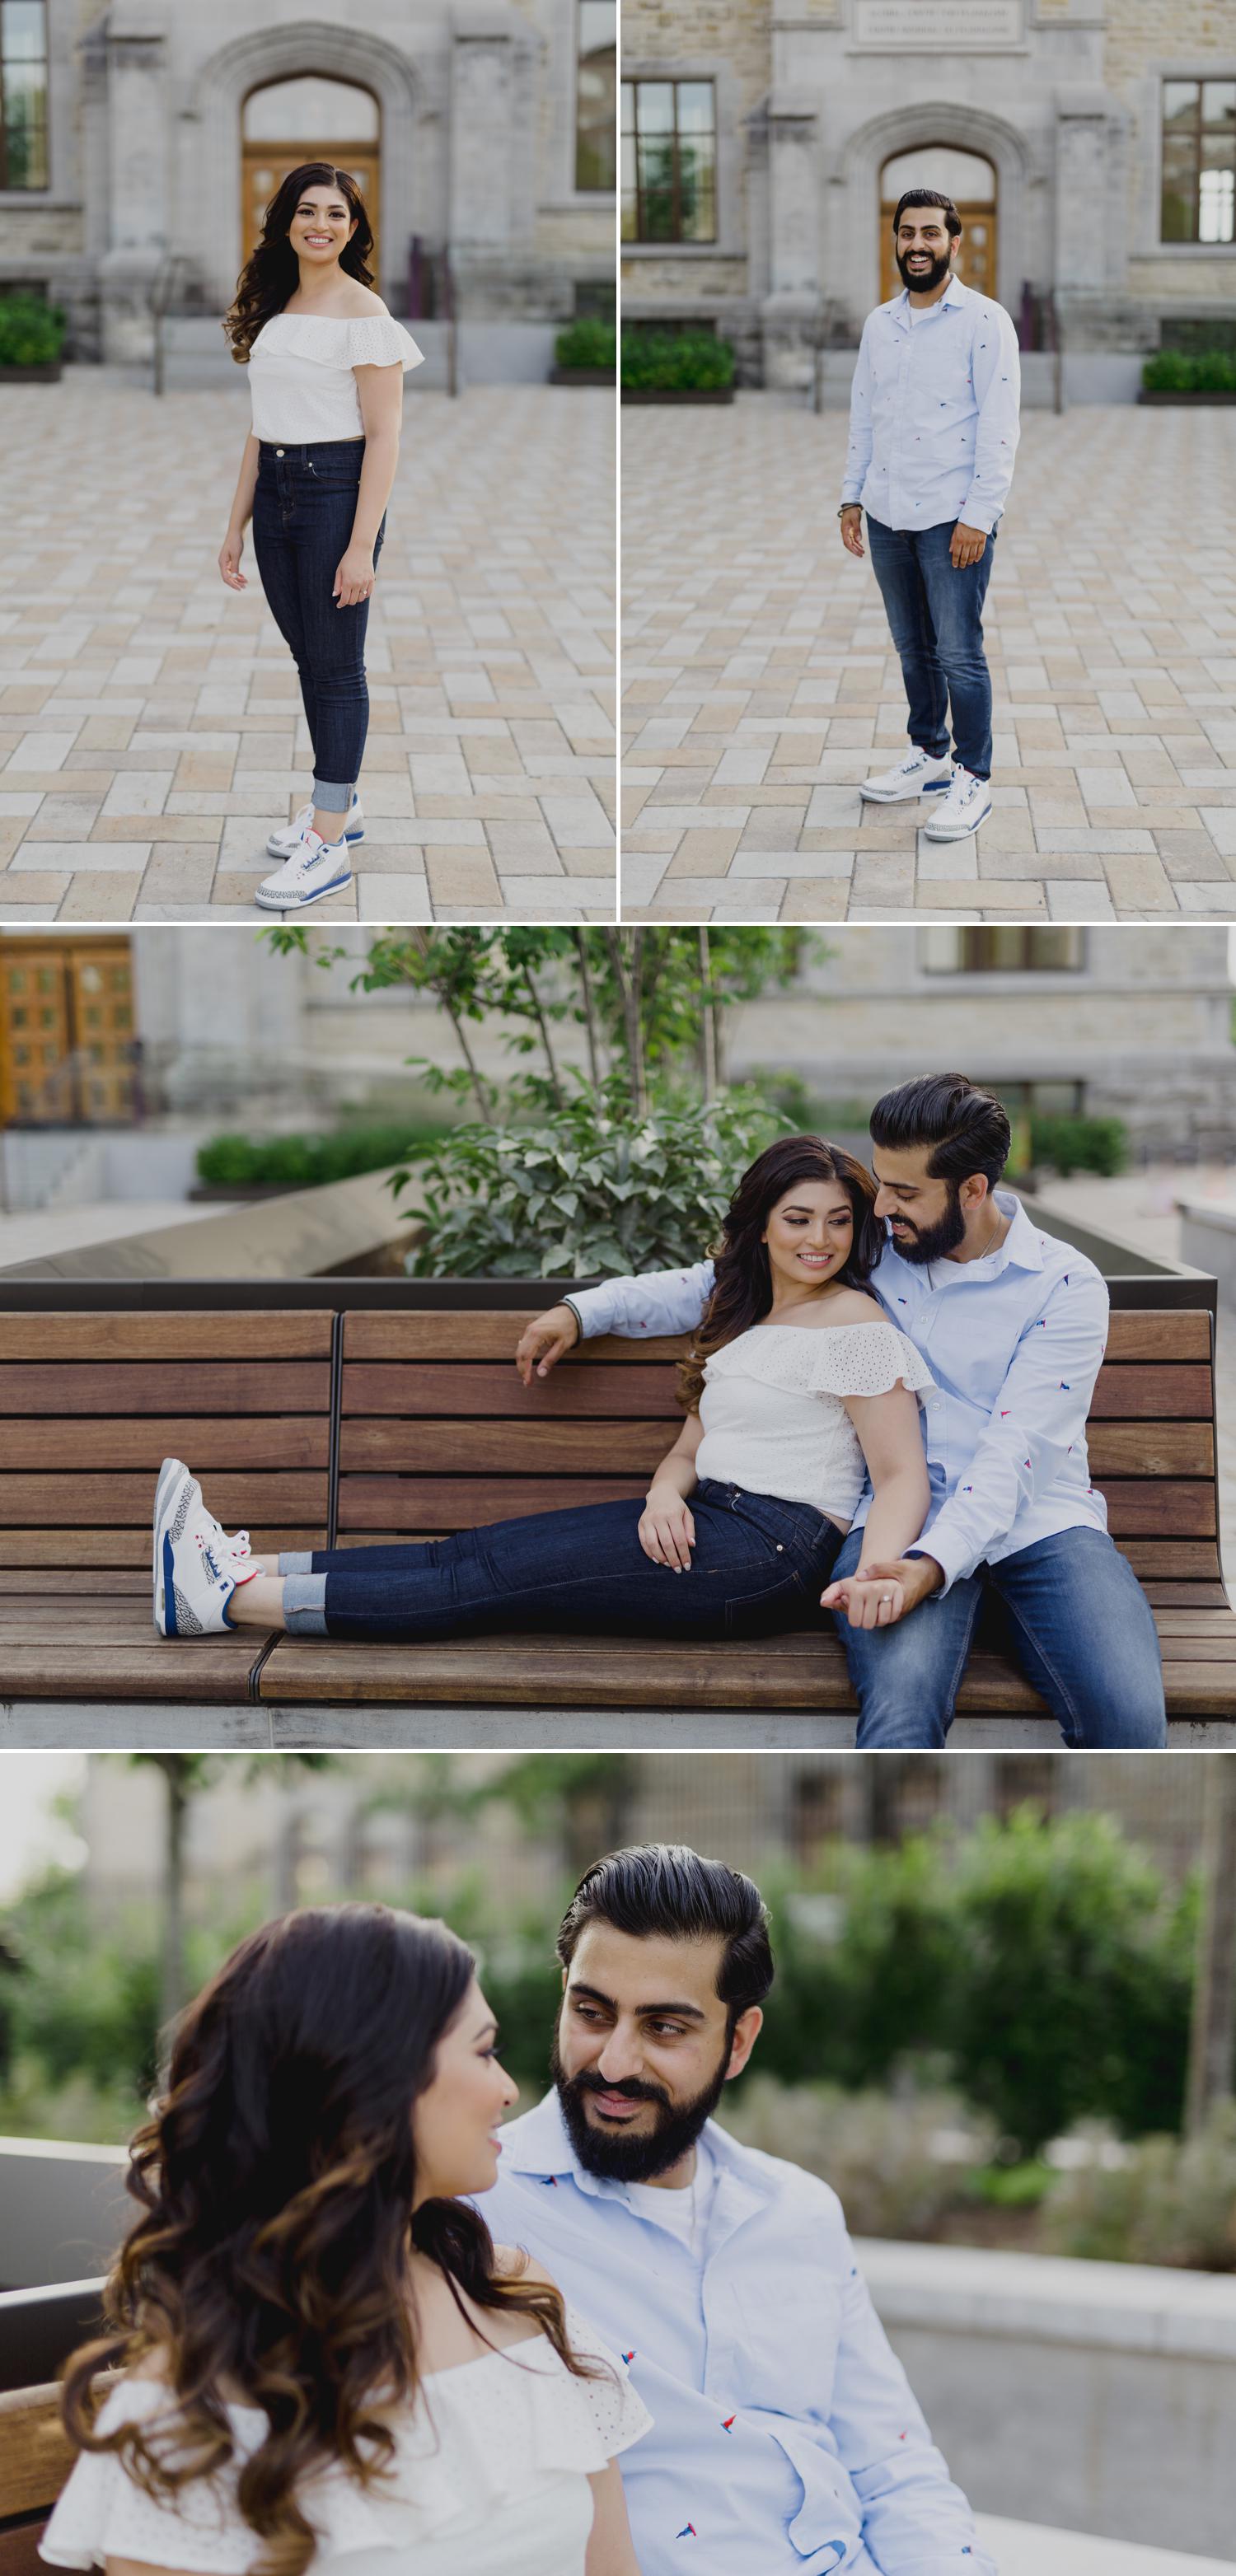 Portraits of an indian man and woman at their engagement shoot in ottawa